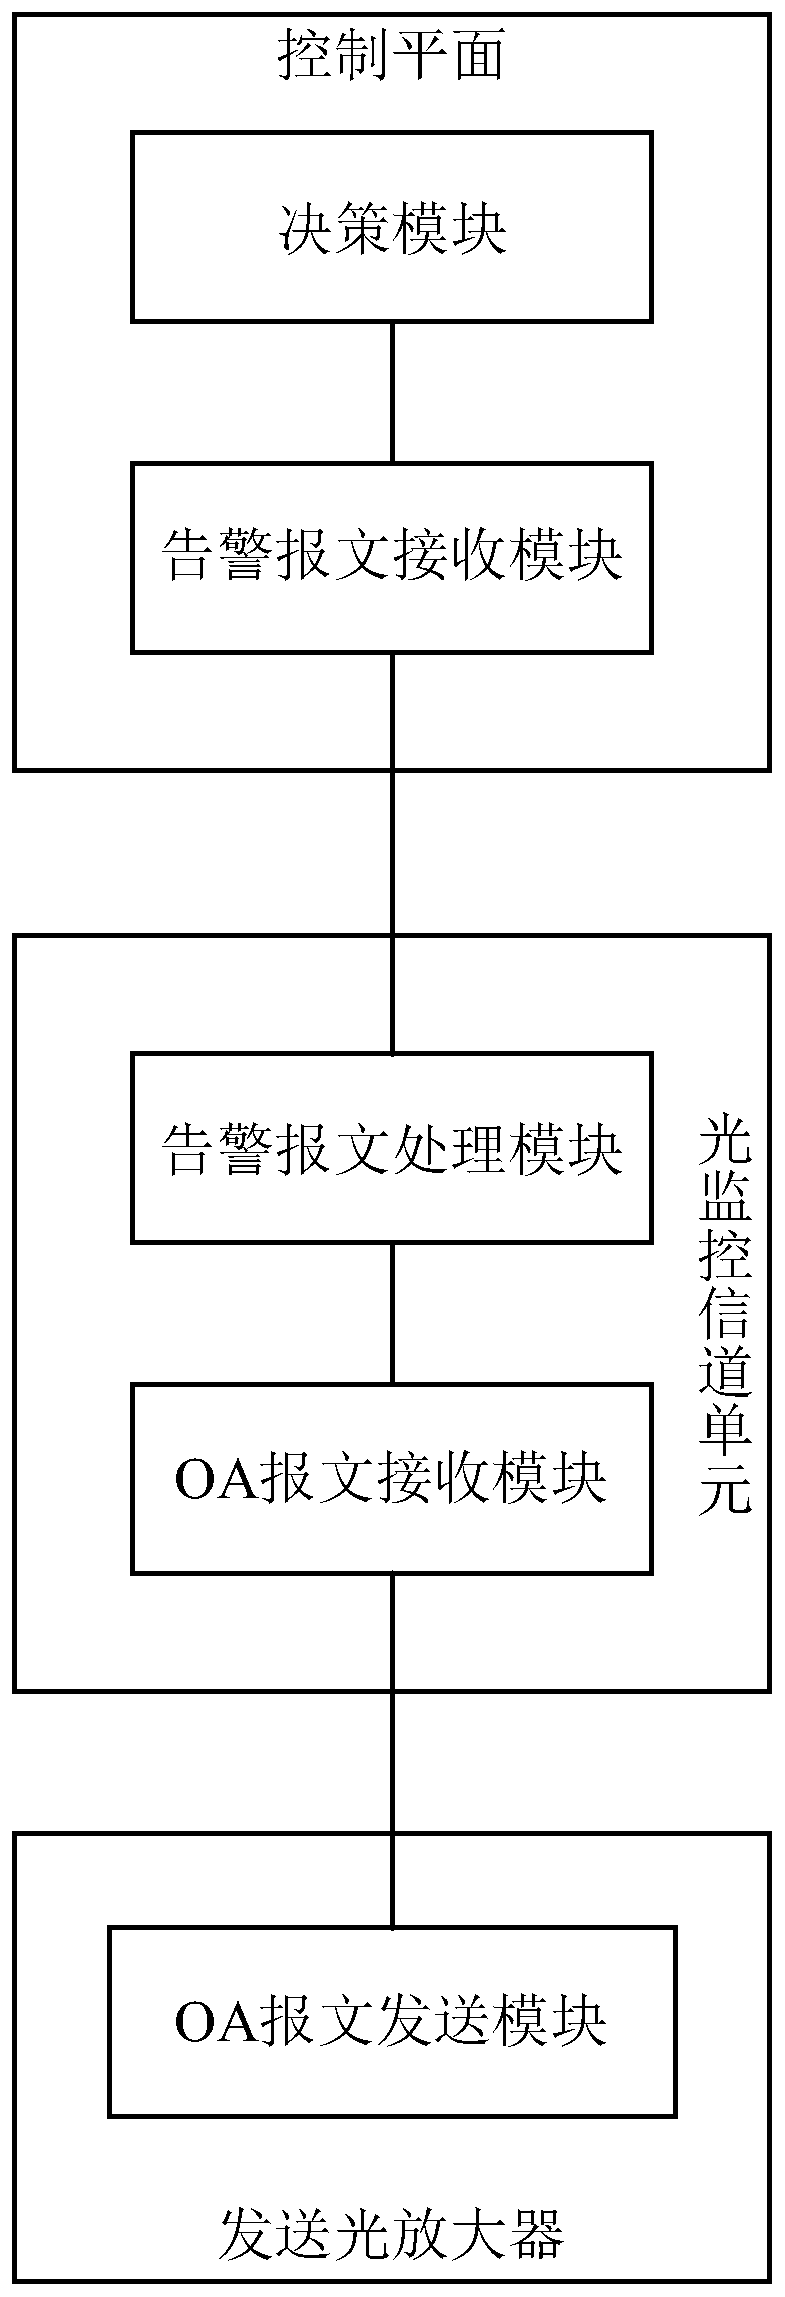 A link and service management method and system